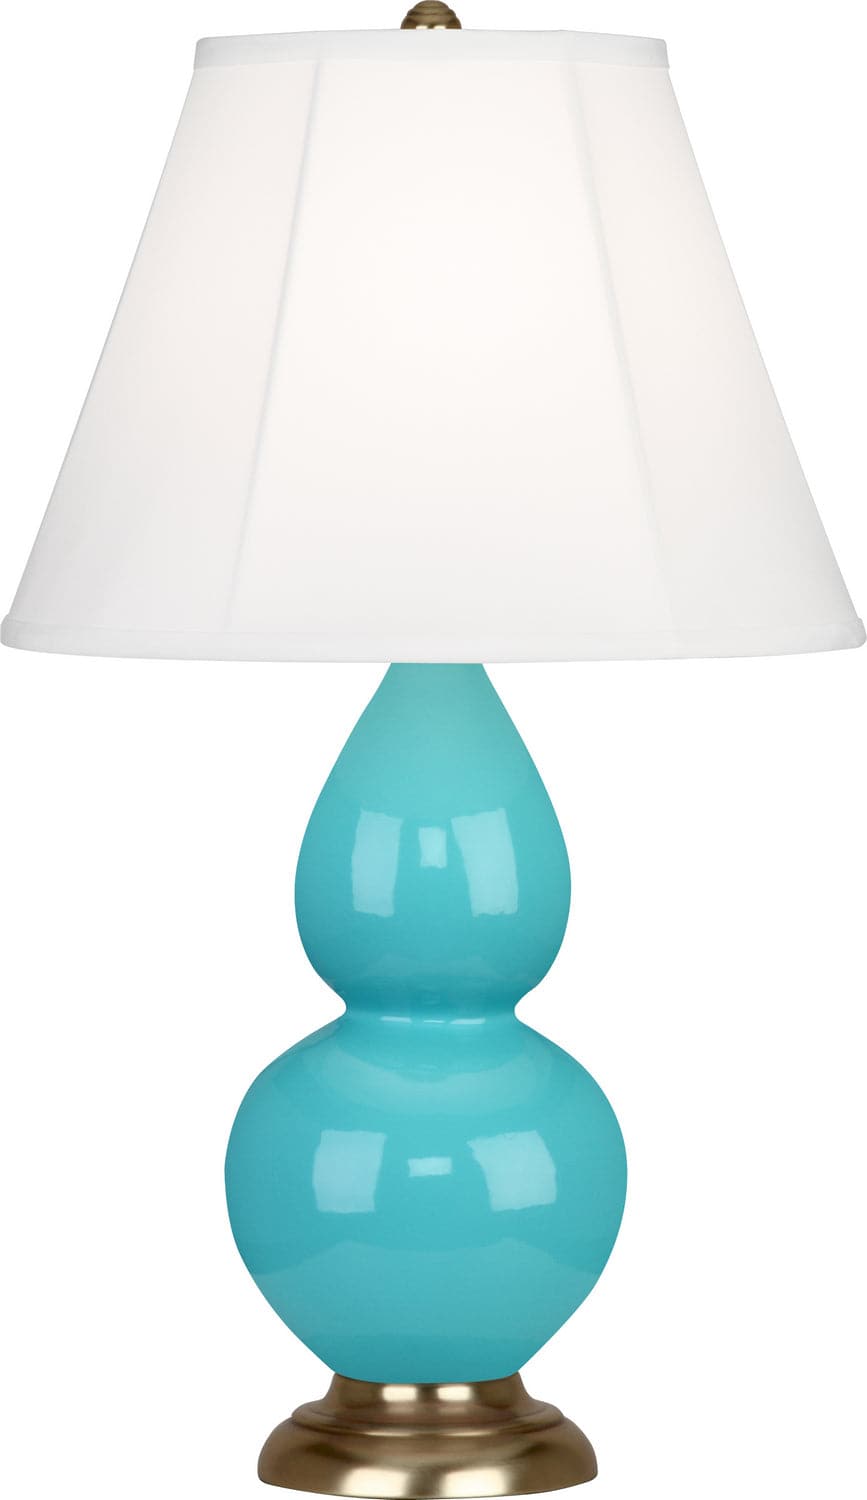 Robert Abbey - 1760 - One Light Accent Lamp - Small Double Gourd - Egg Blue Glazed